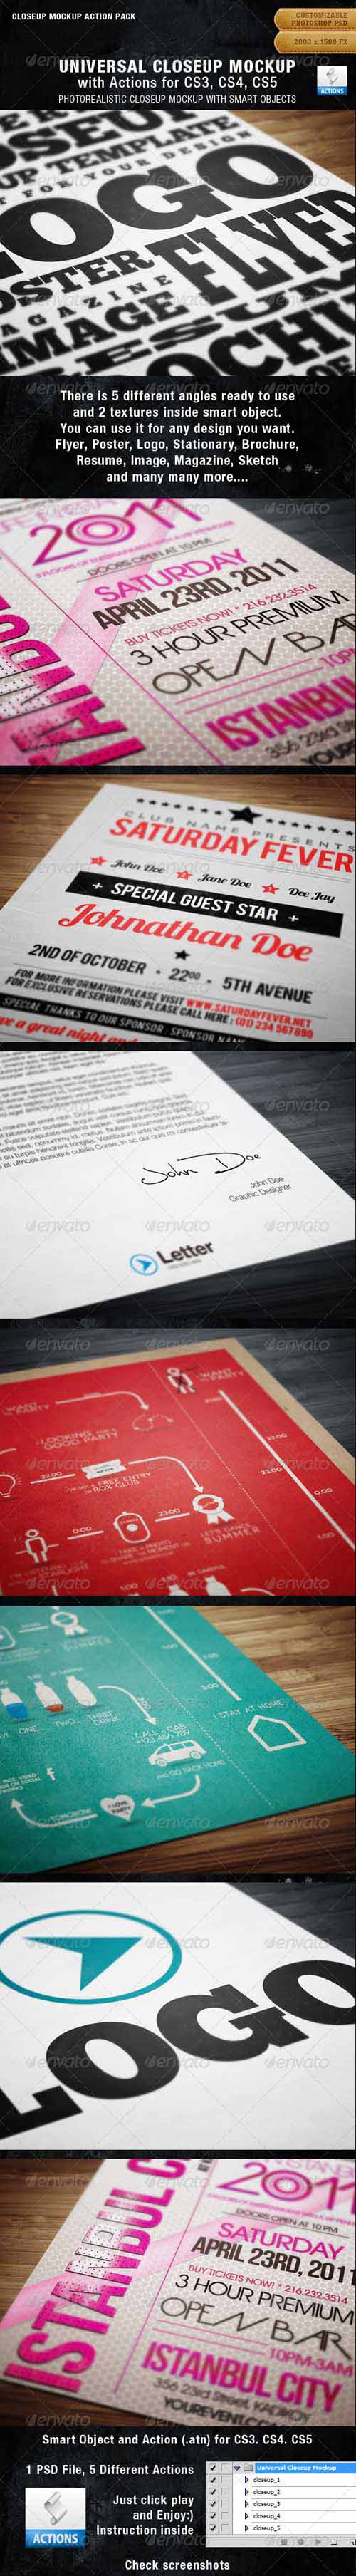 GraphicRiver: Universal Closeup Mockup Action Pack